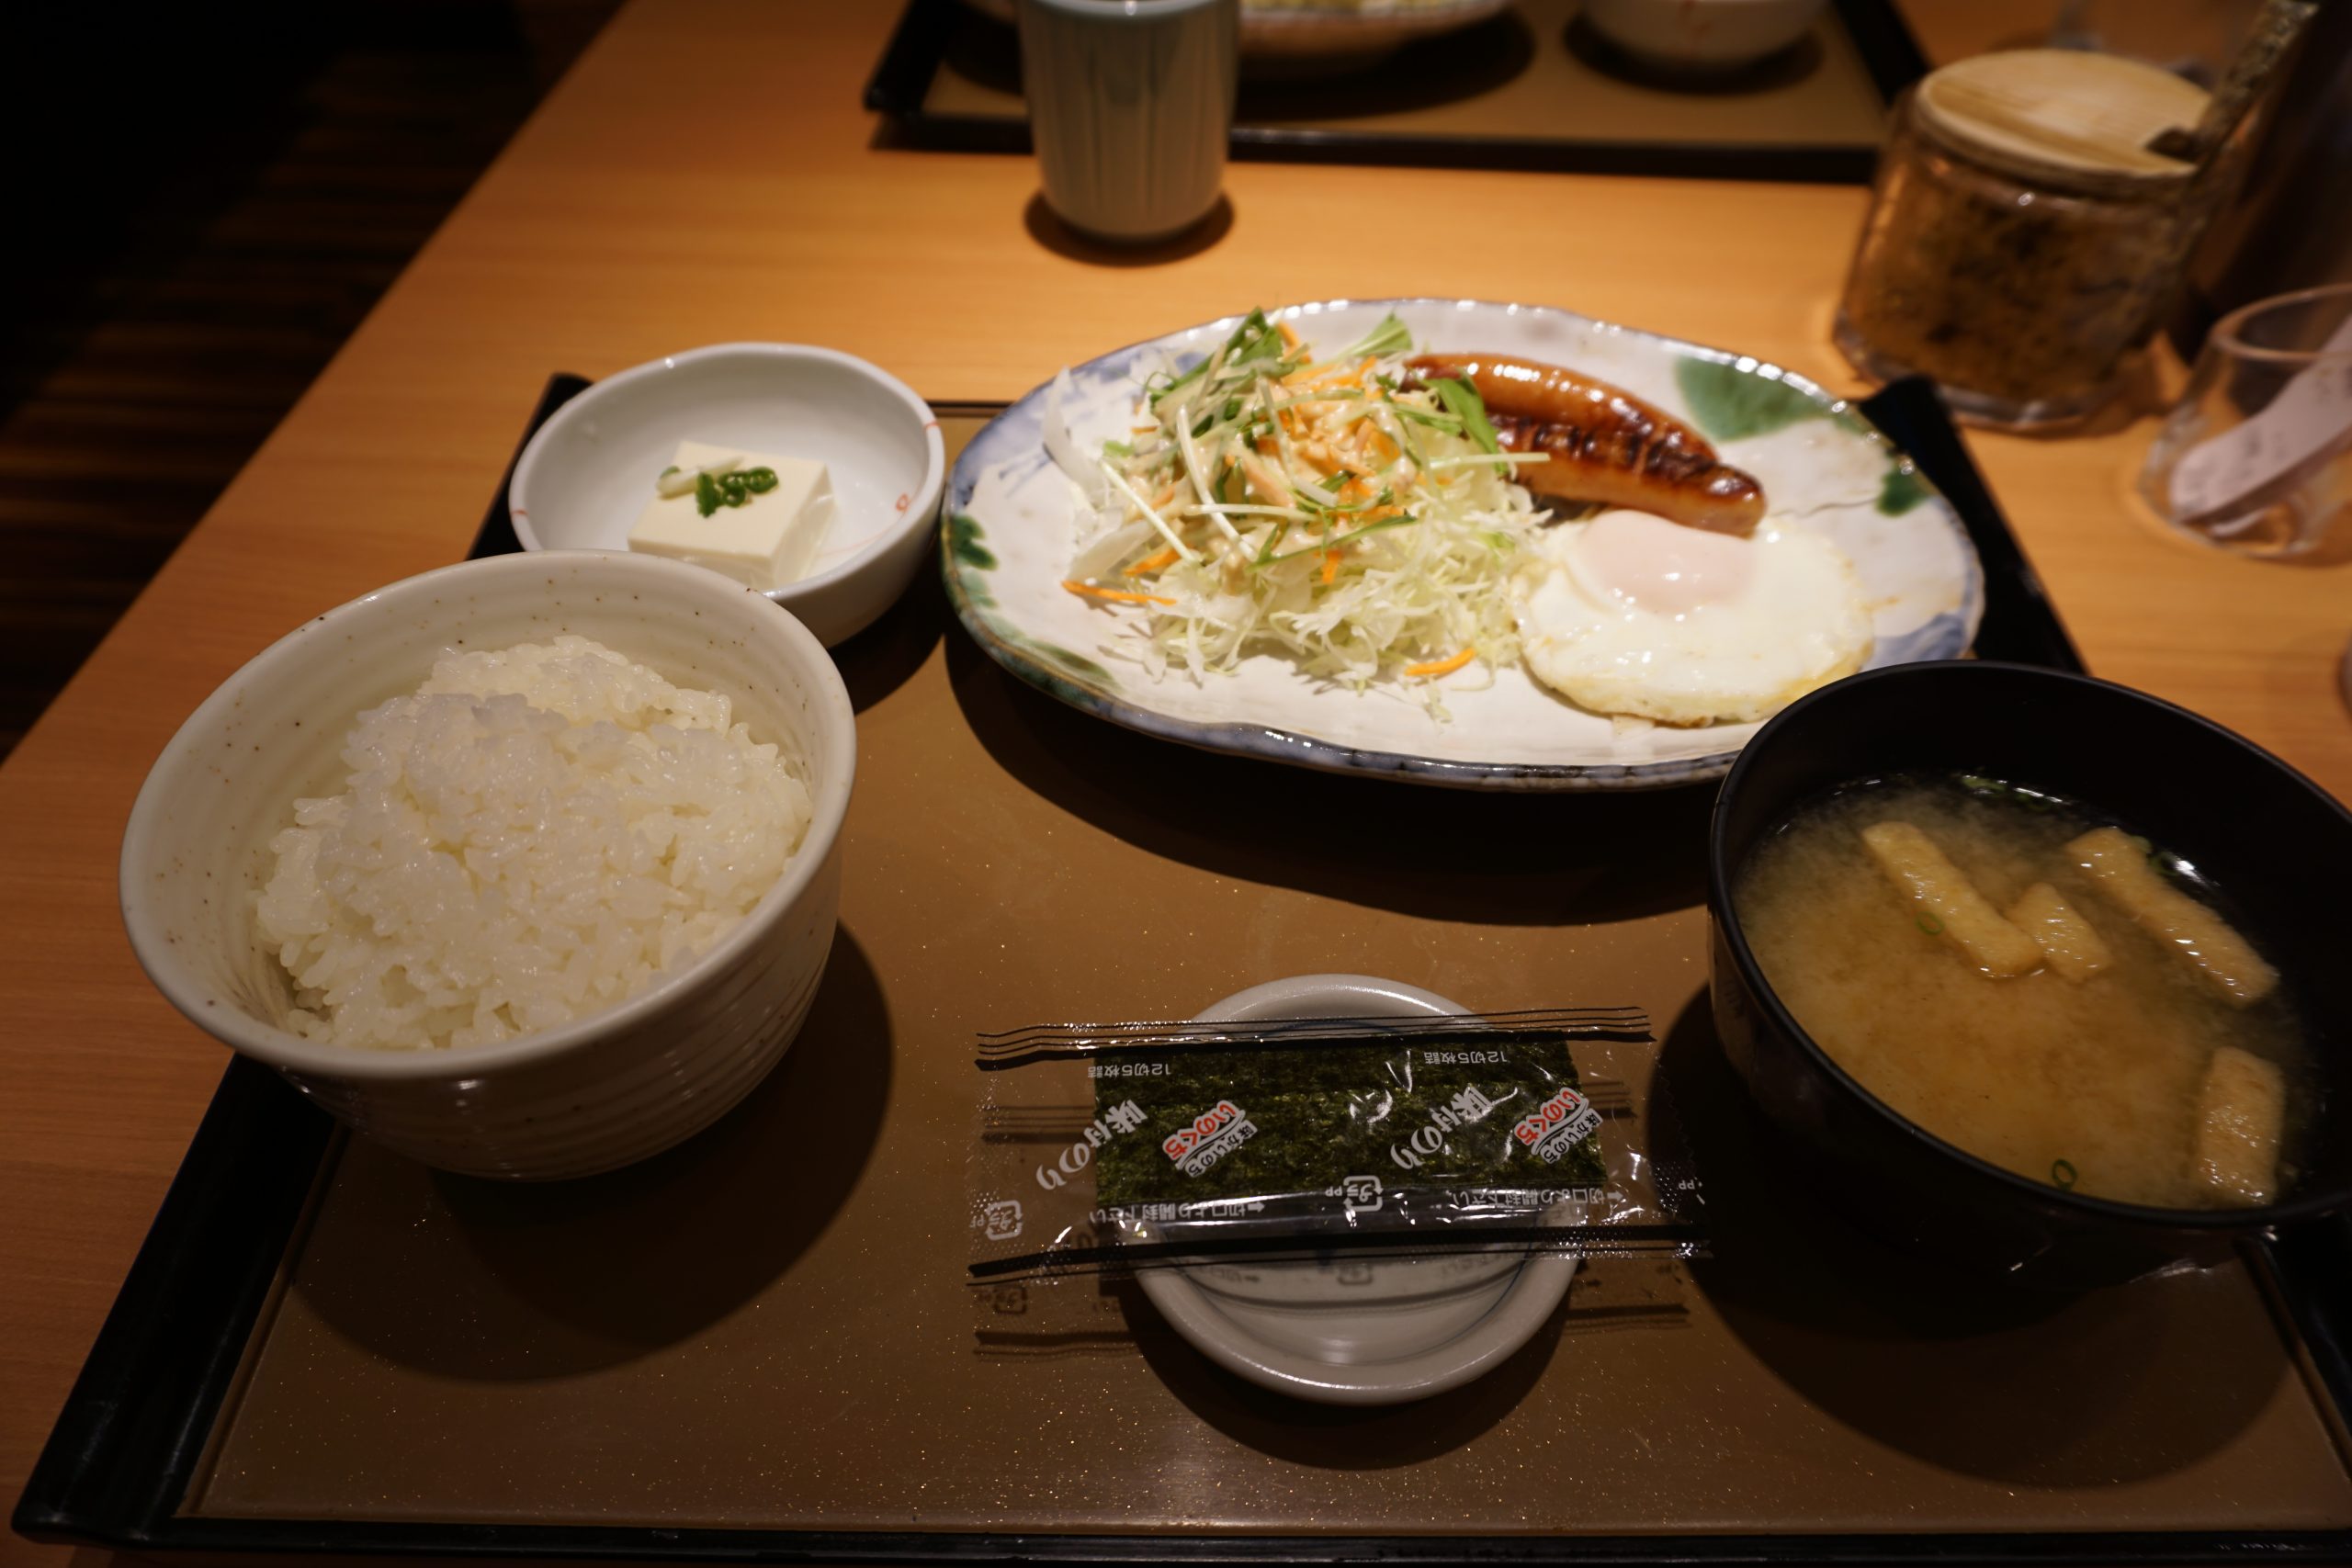 Japanese breakfast with a side of miso soup